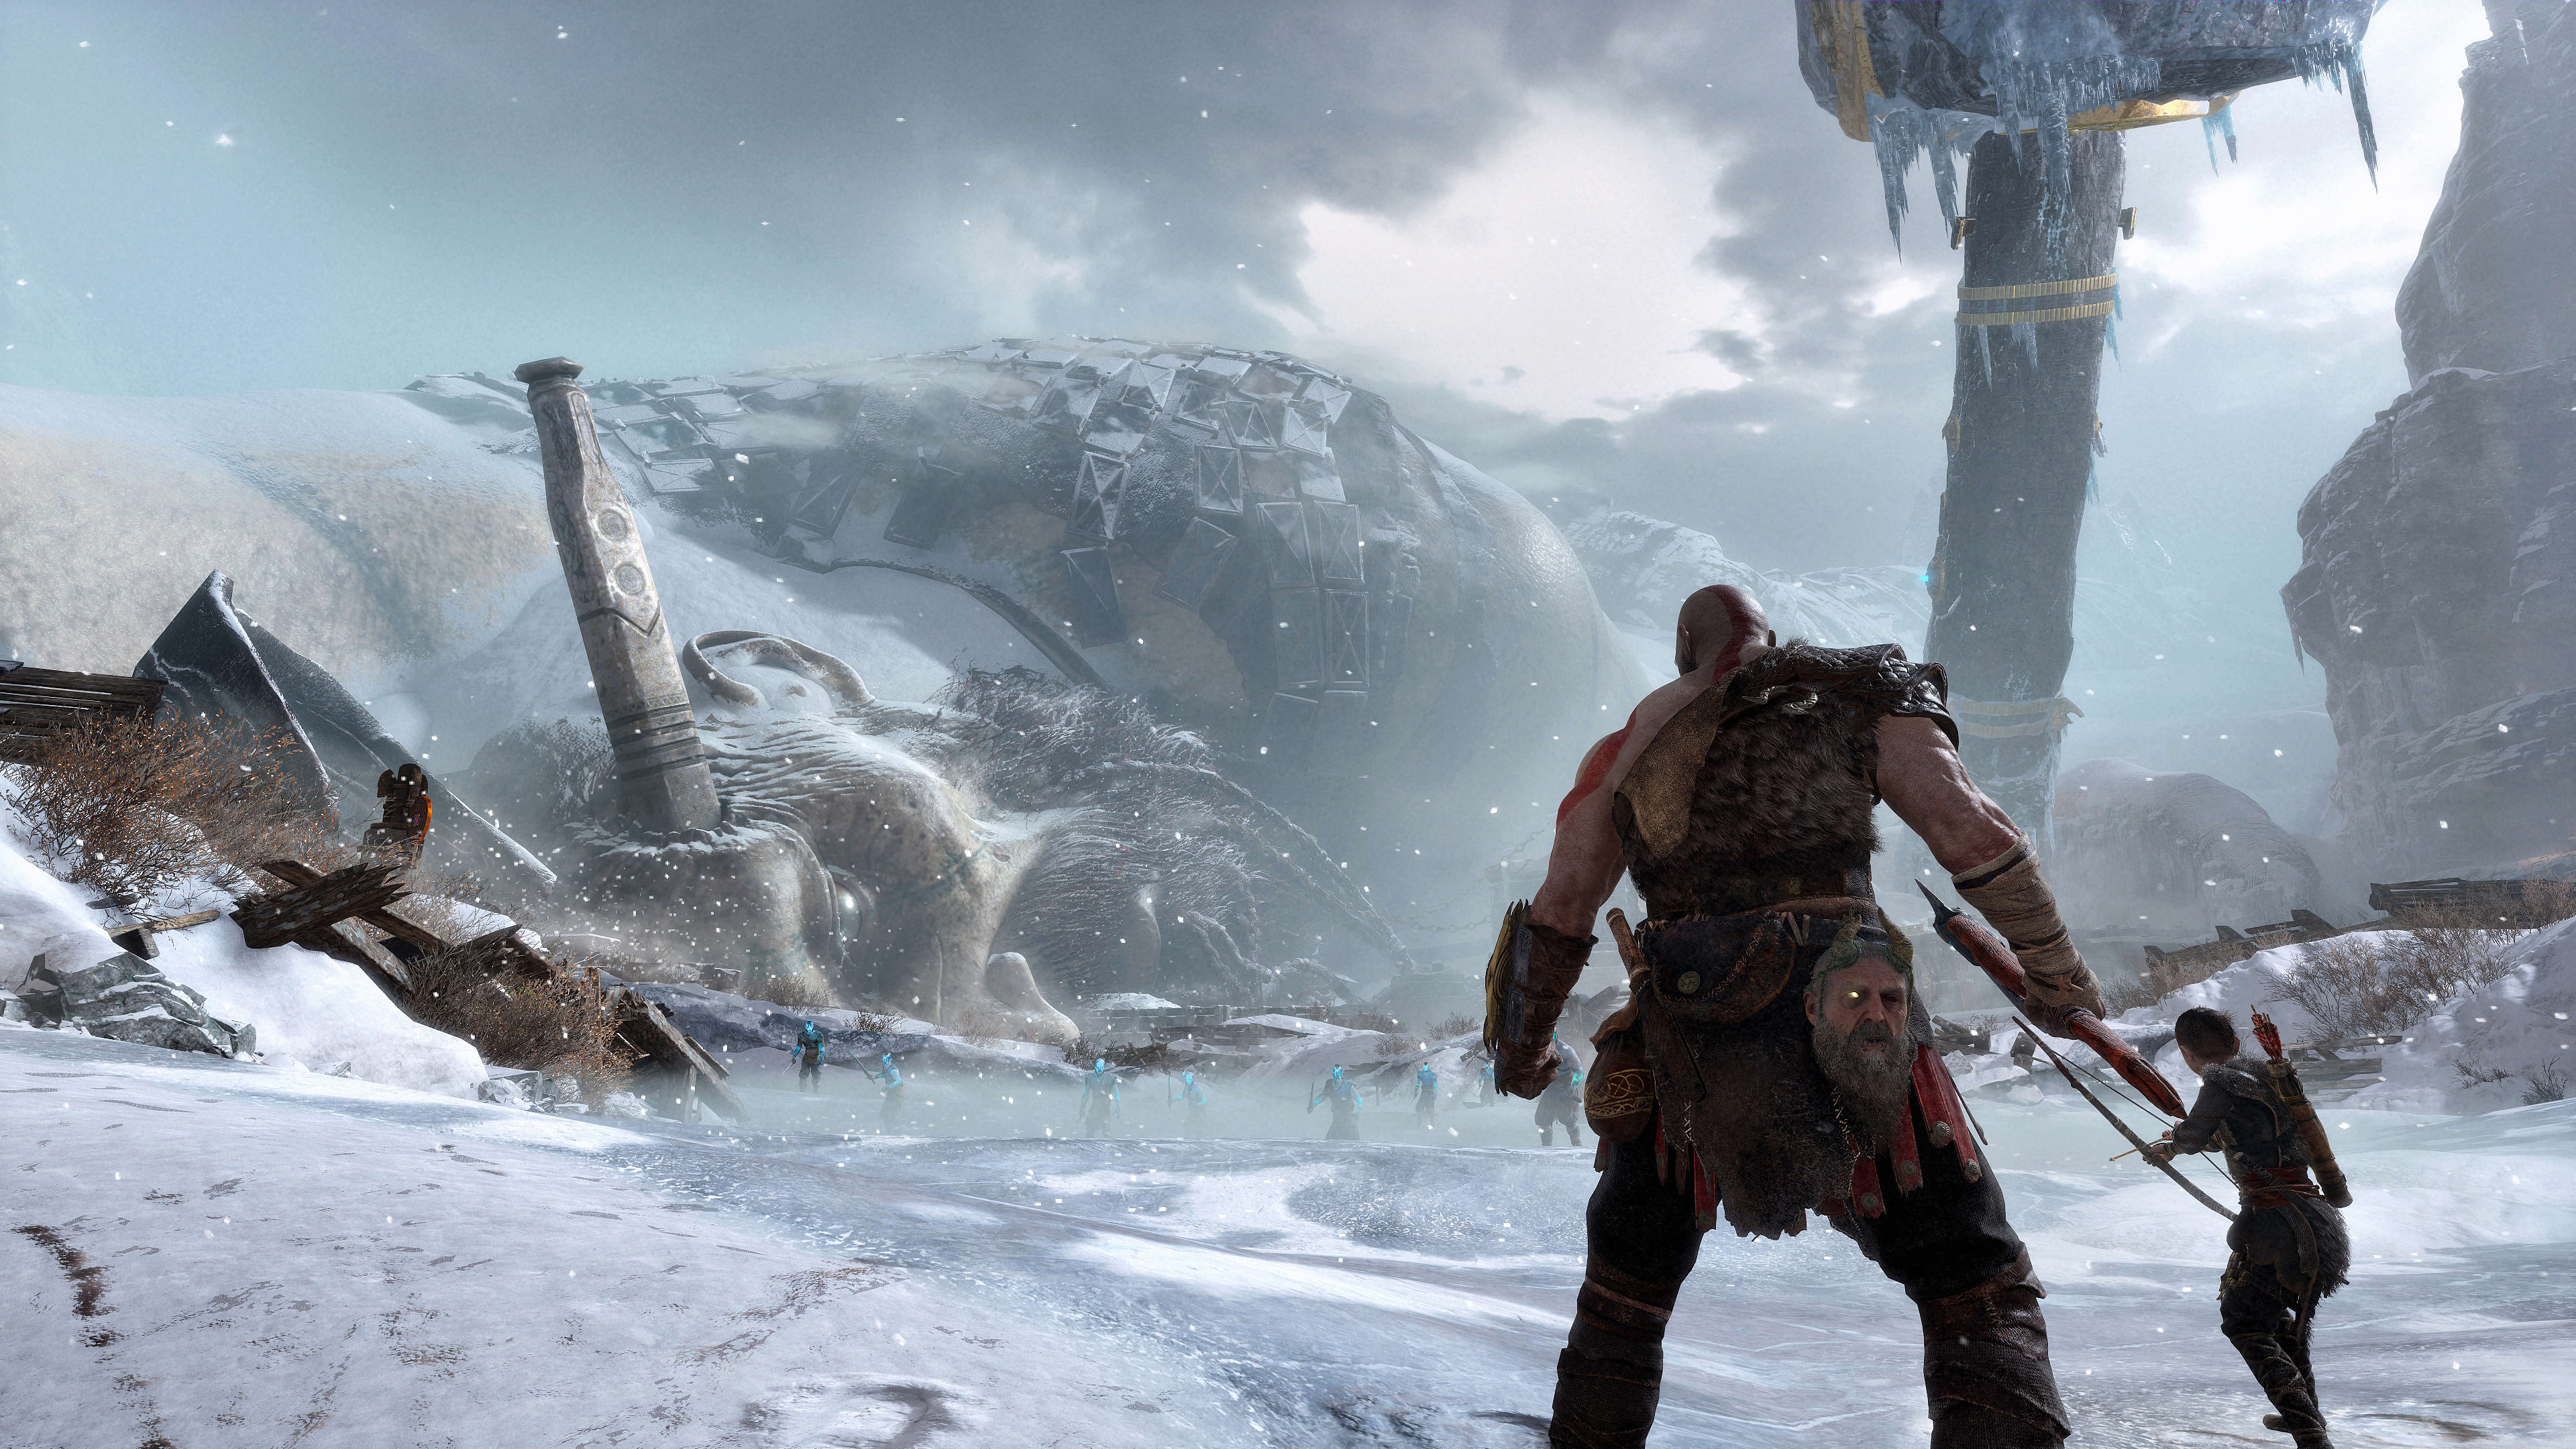 God of war for android free download apk windows 7